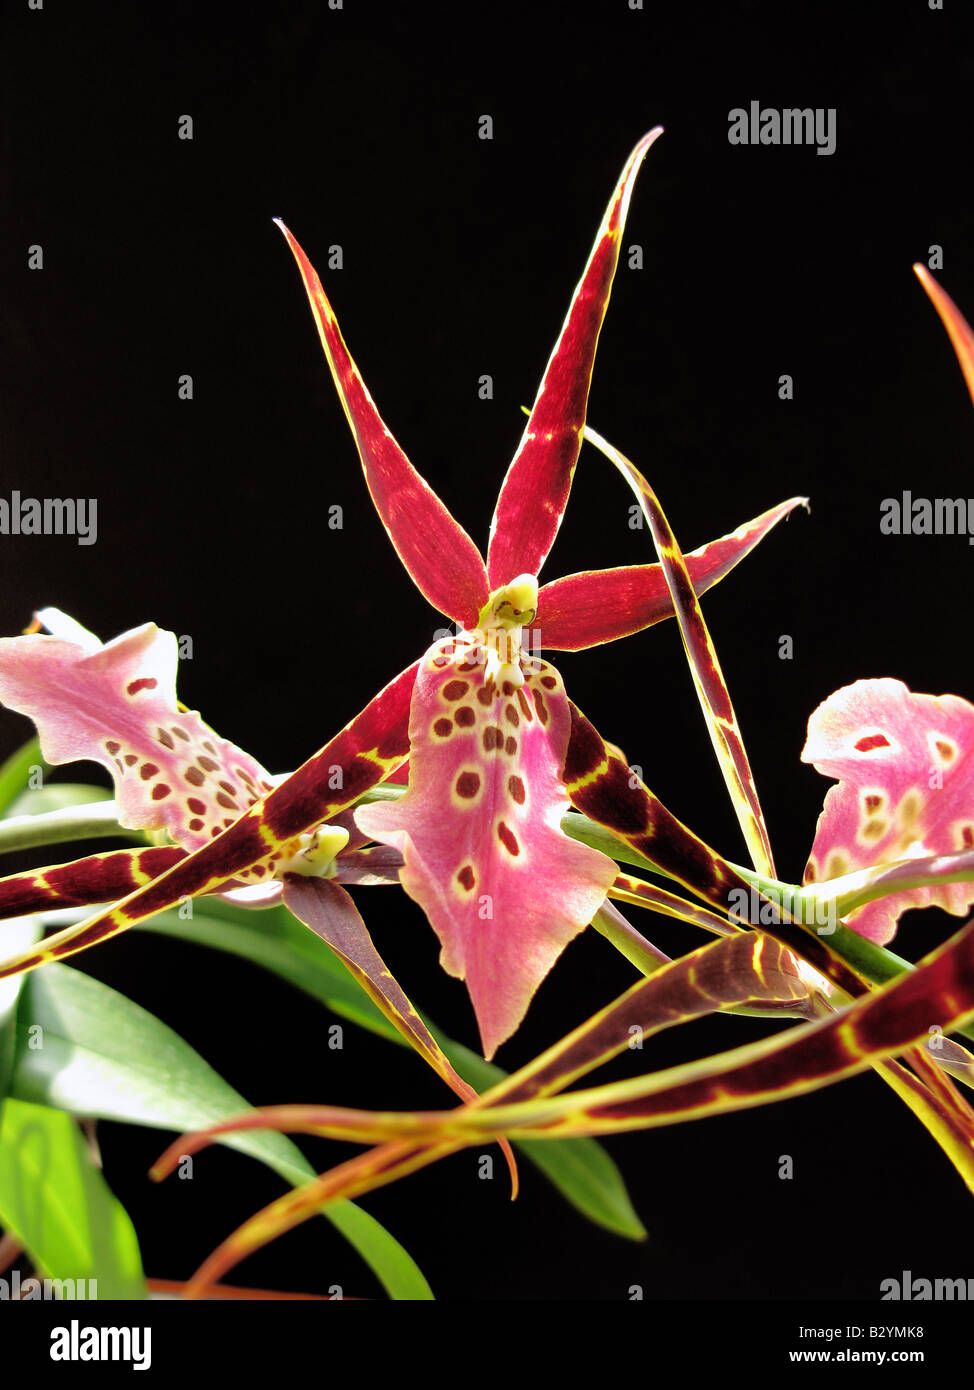 MTSSA Miltassia shelob tolkien AM/AOS Spider orchid close up Stock Photo